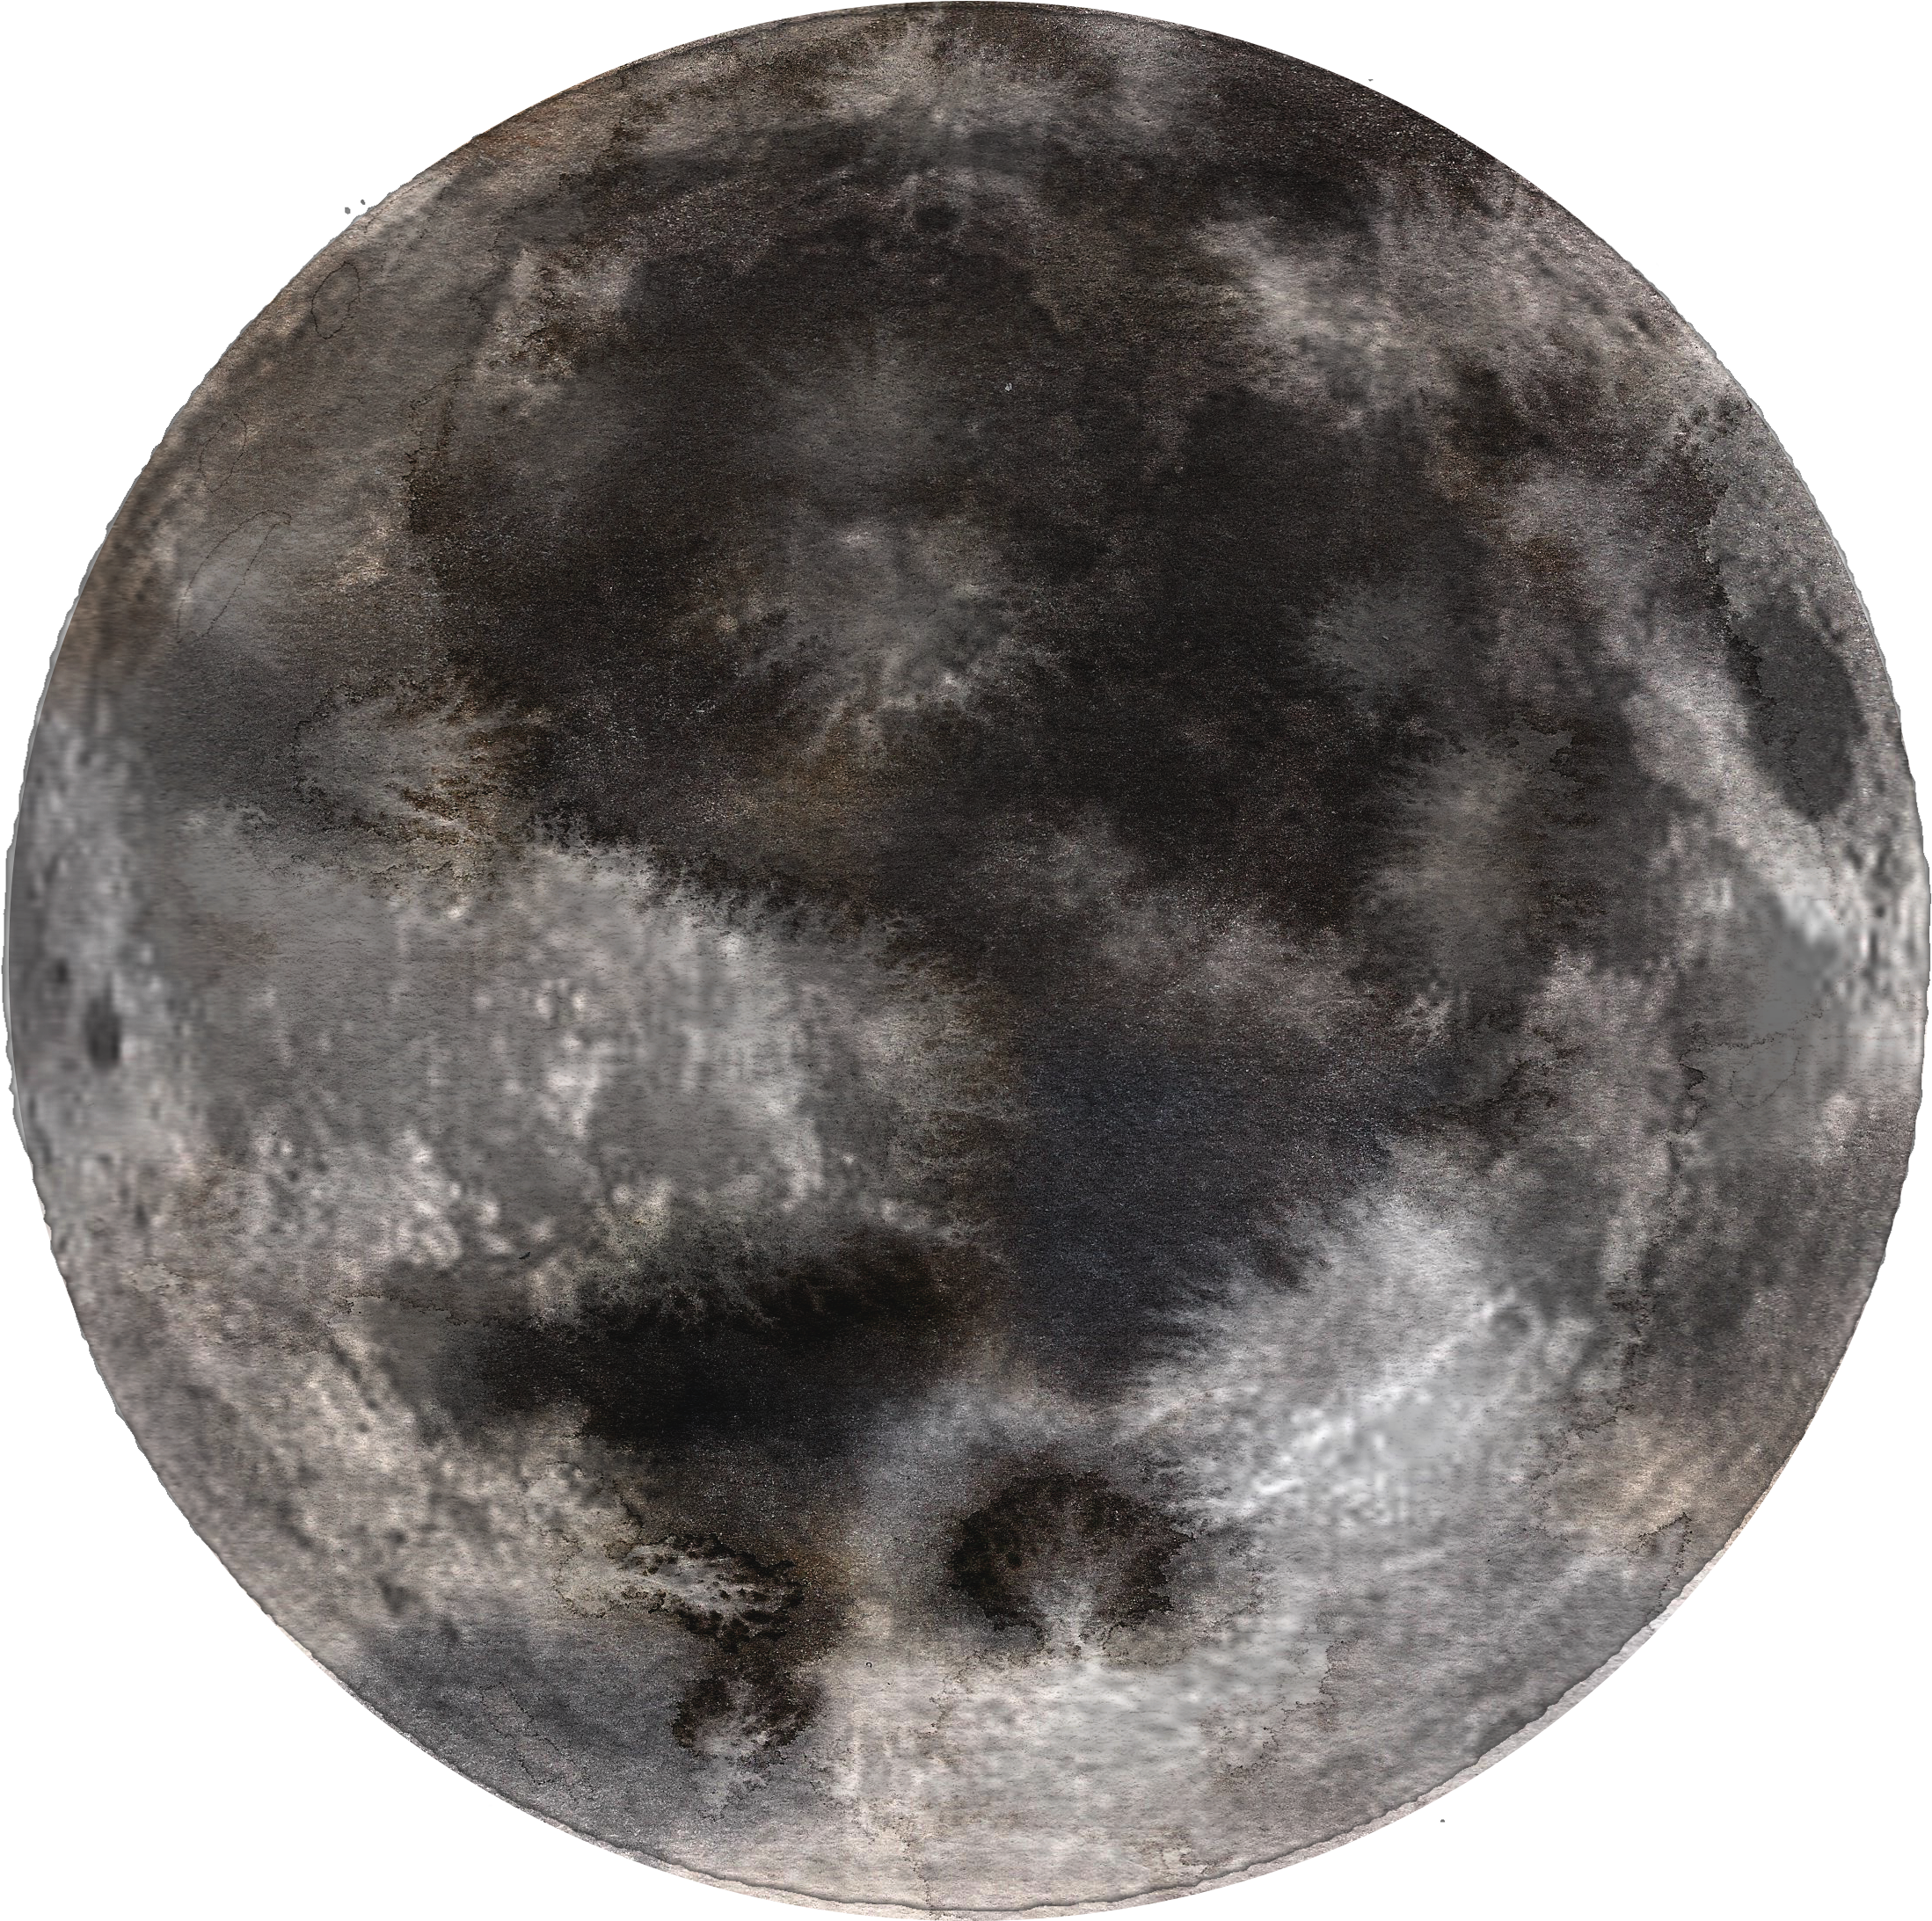 A Full Moon With Dark Spots